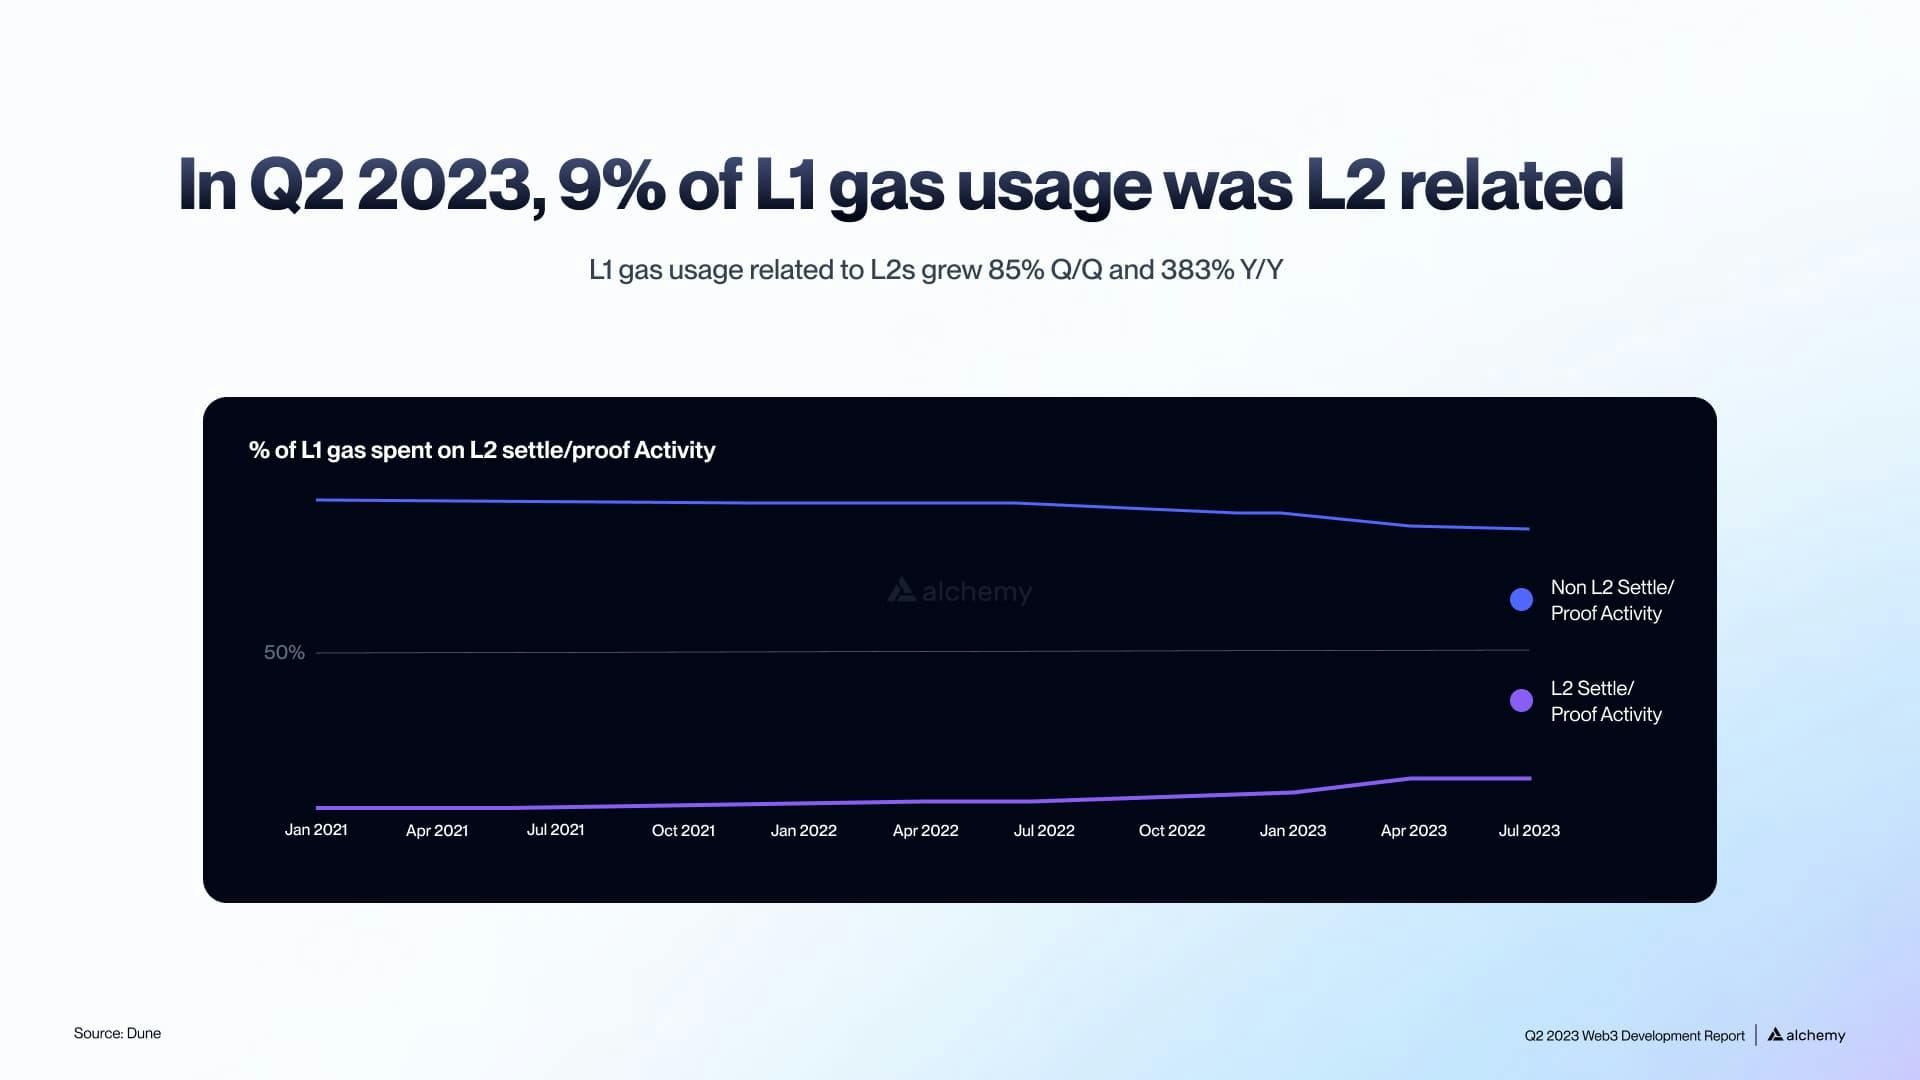 L1 Gas Usage Related to L2s in Q2 2023